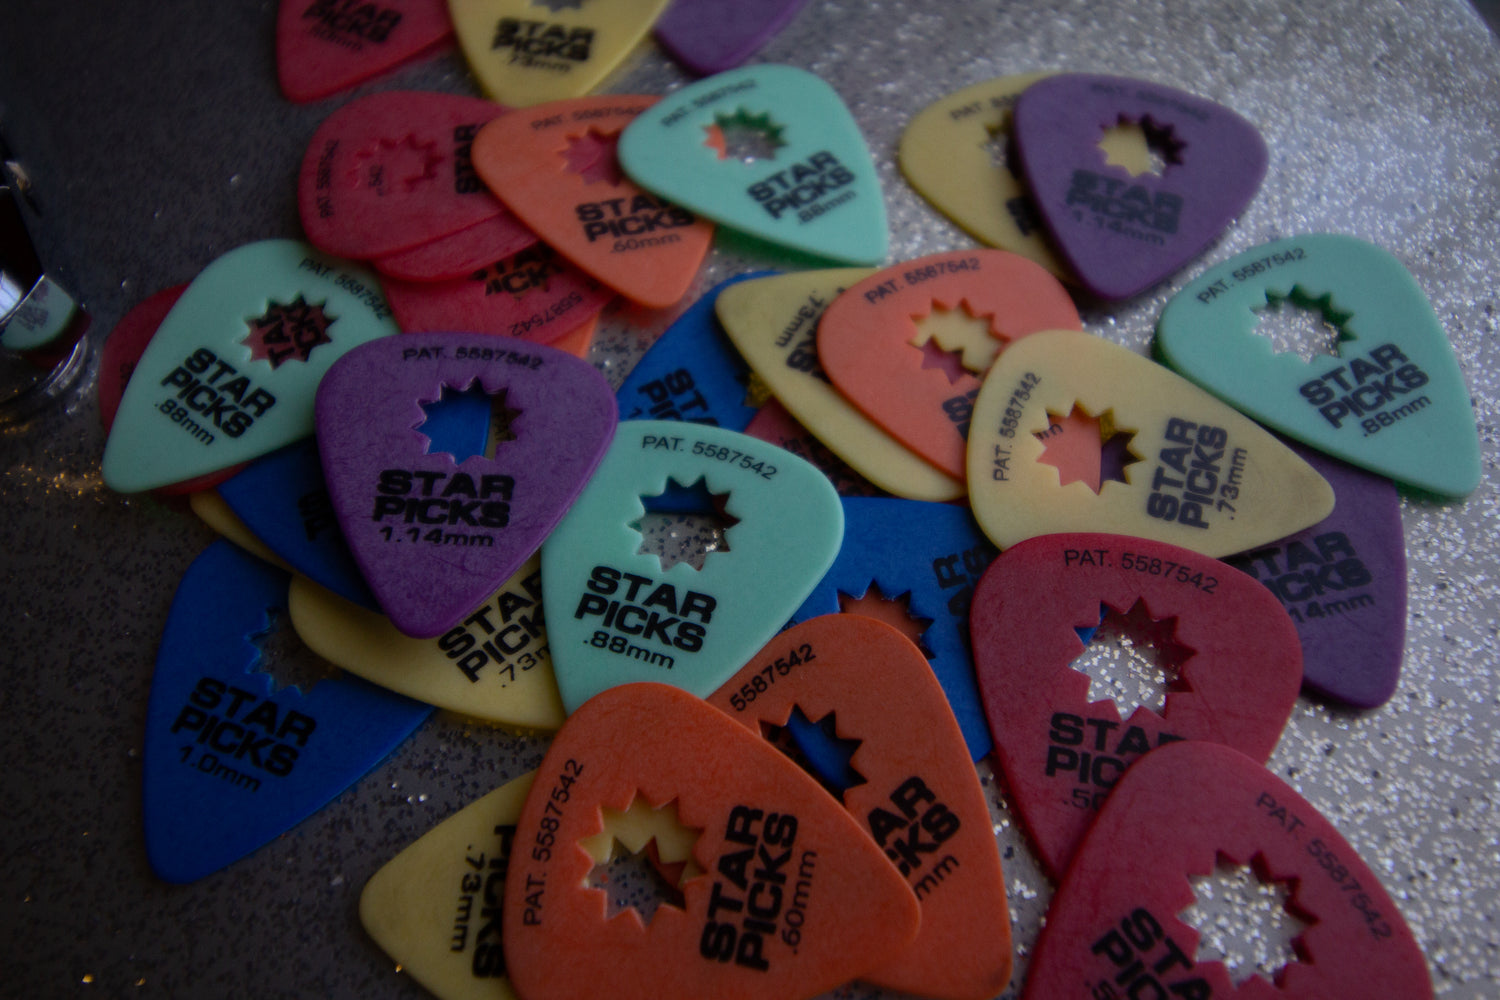 Cleartone Strings guitar picks scattered across a symbol